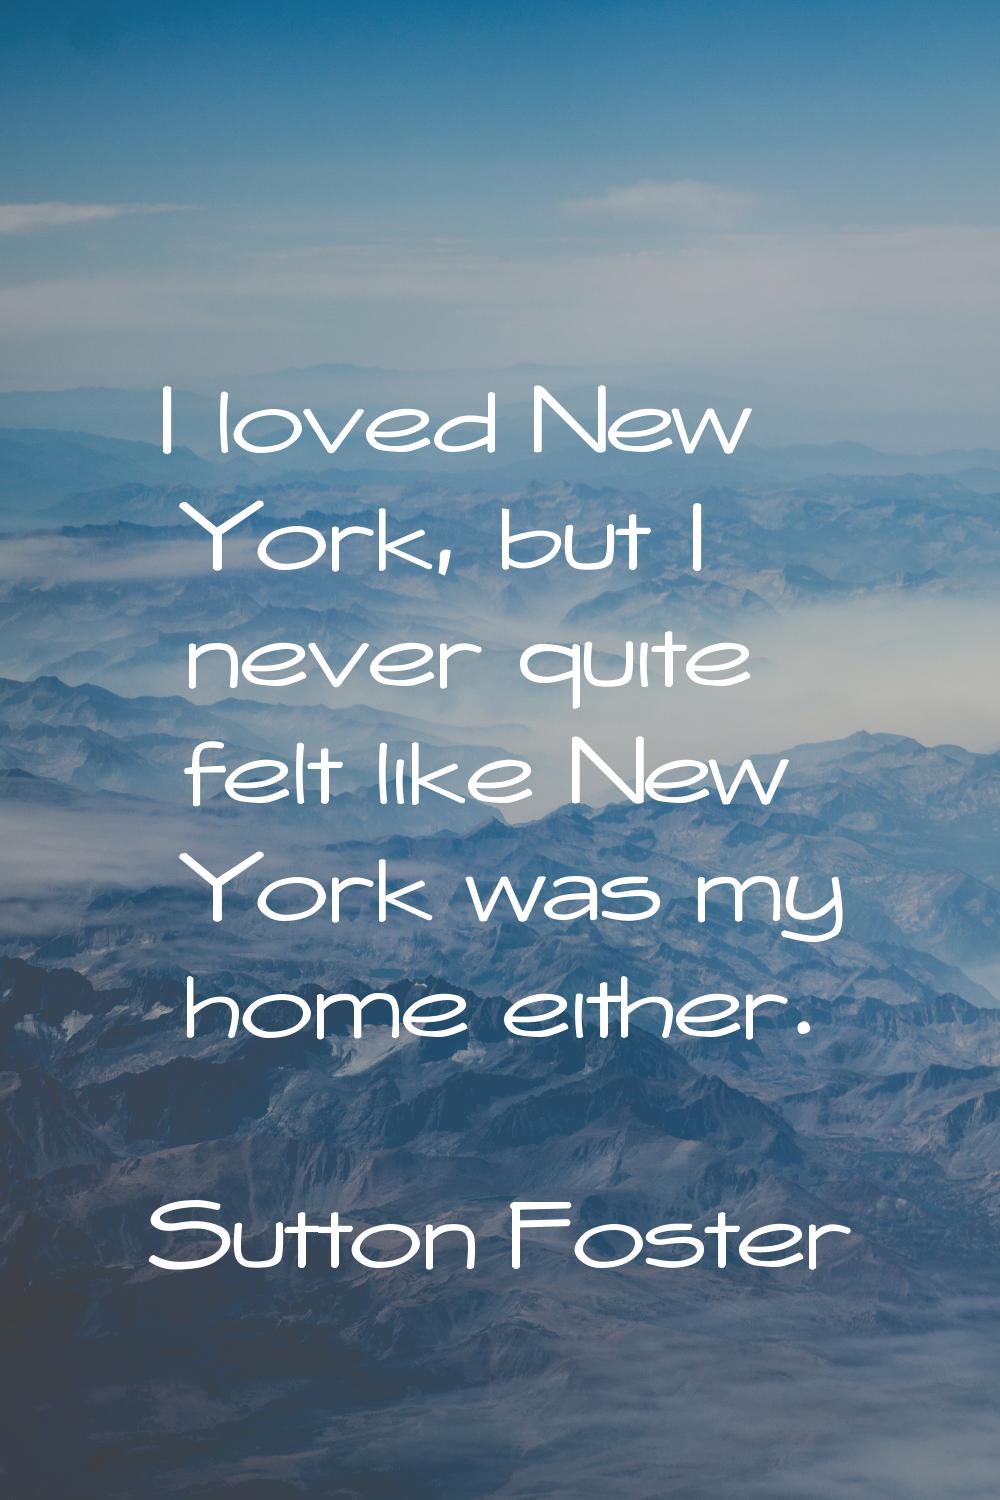 I loved New York, but I never quite felt like New York was my home either.